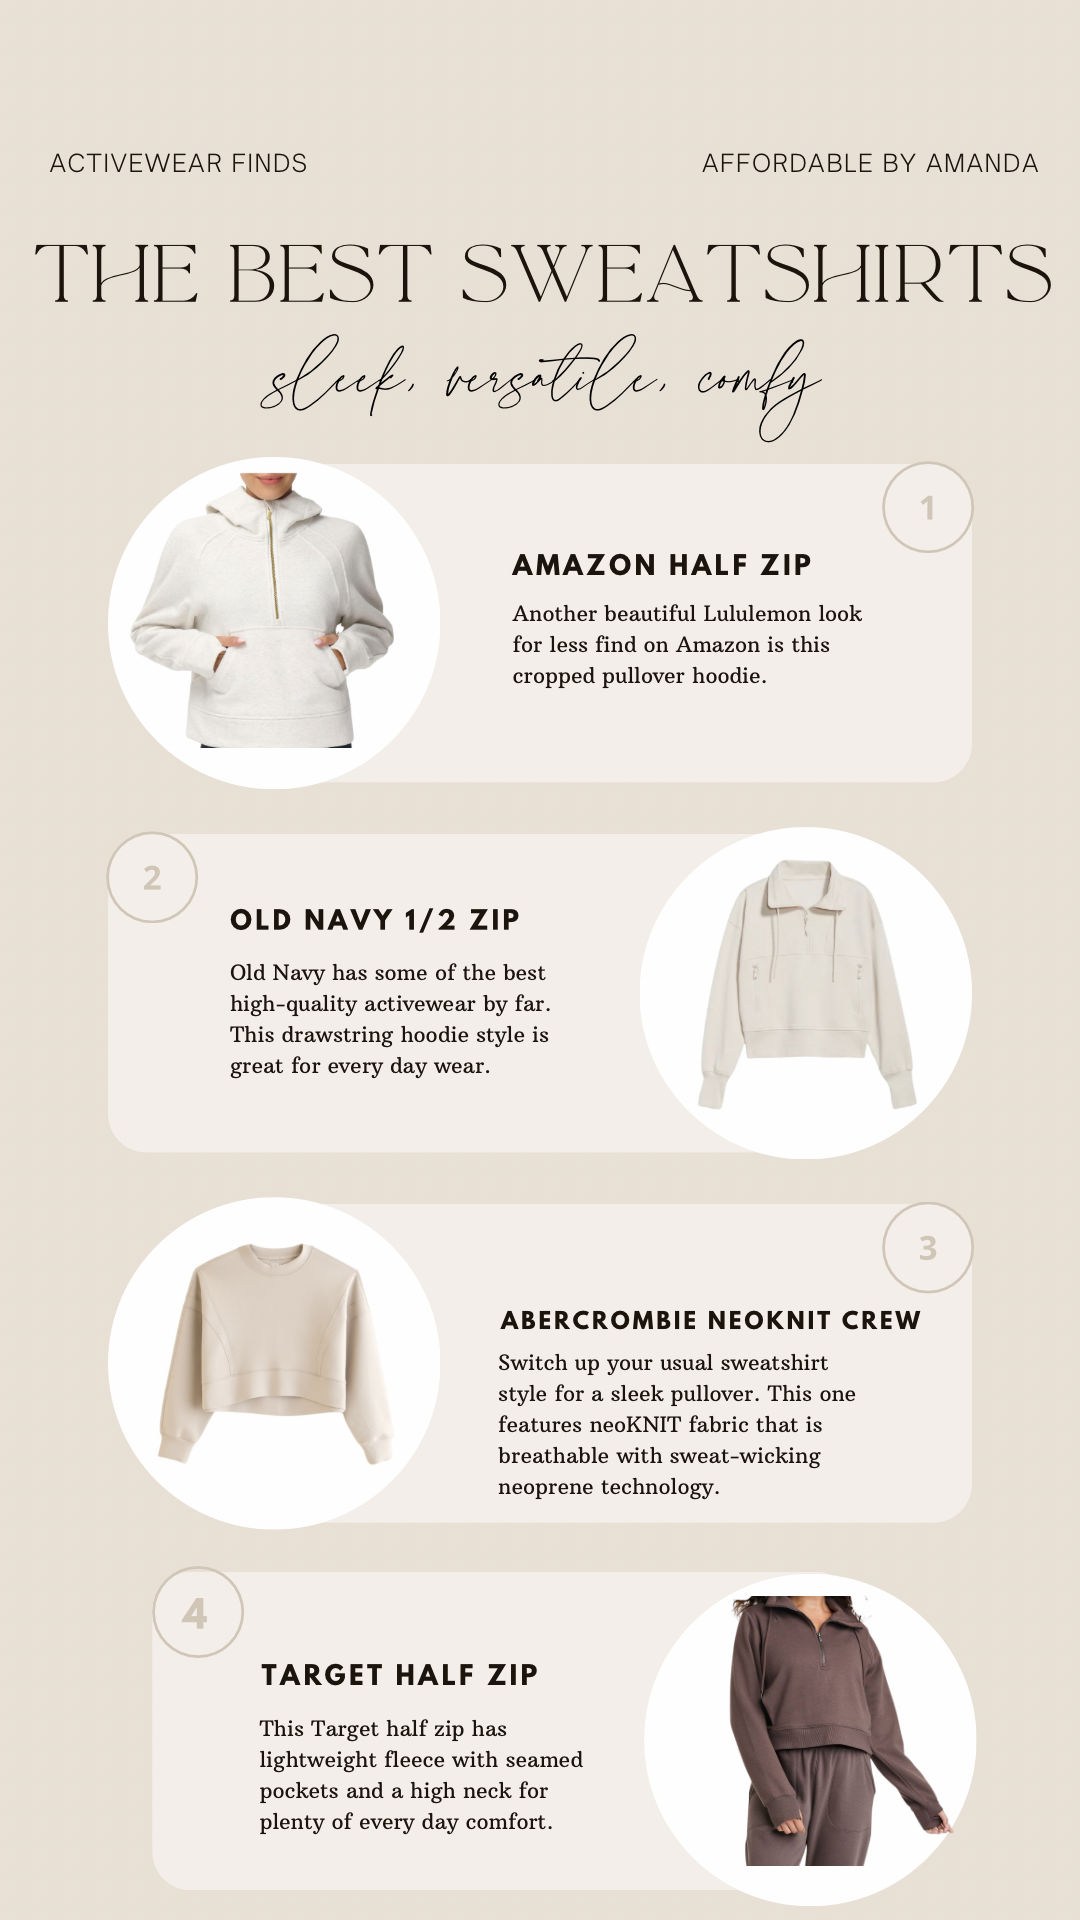 The Best Sweatshirts for Women | Affordable by Amanda